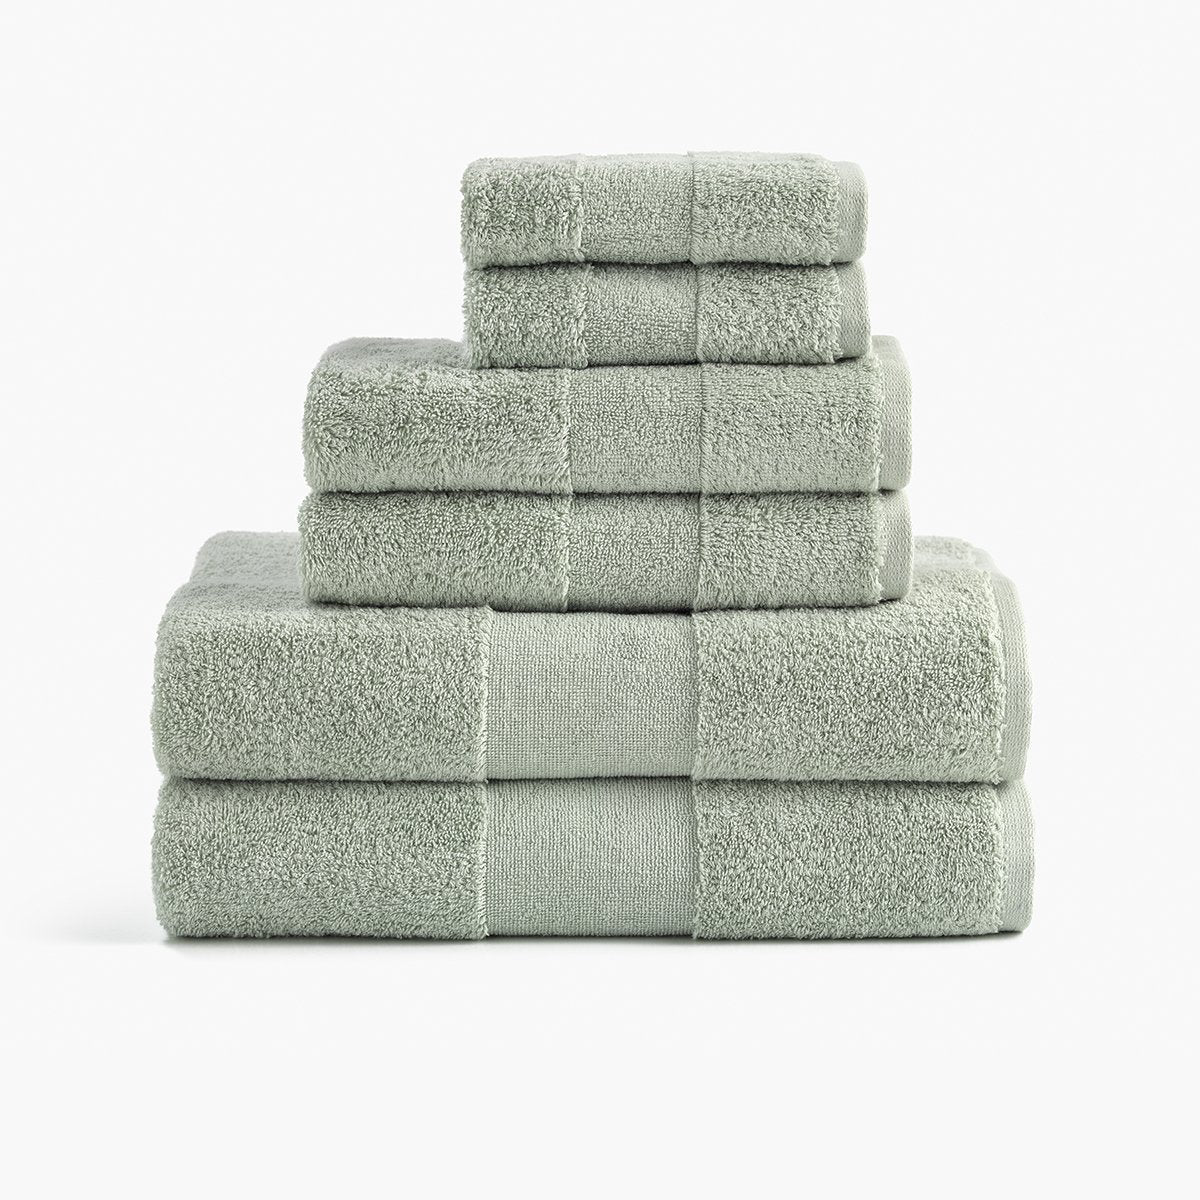 Sustainable Bamboo Bath Towels, Set of 2 - Charcoal Gray - Made in